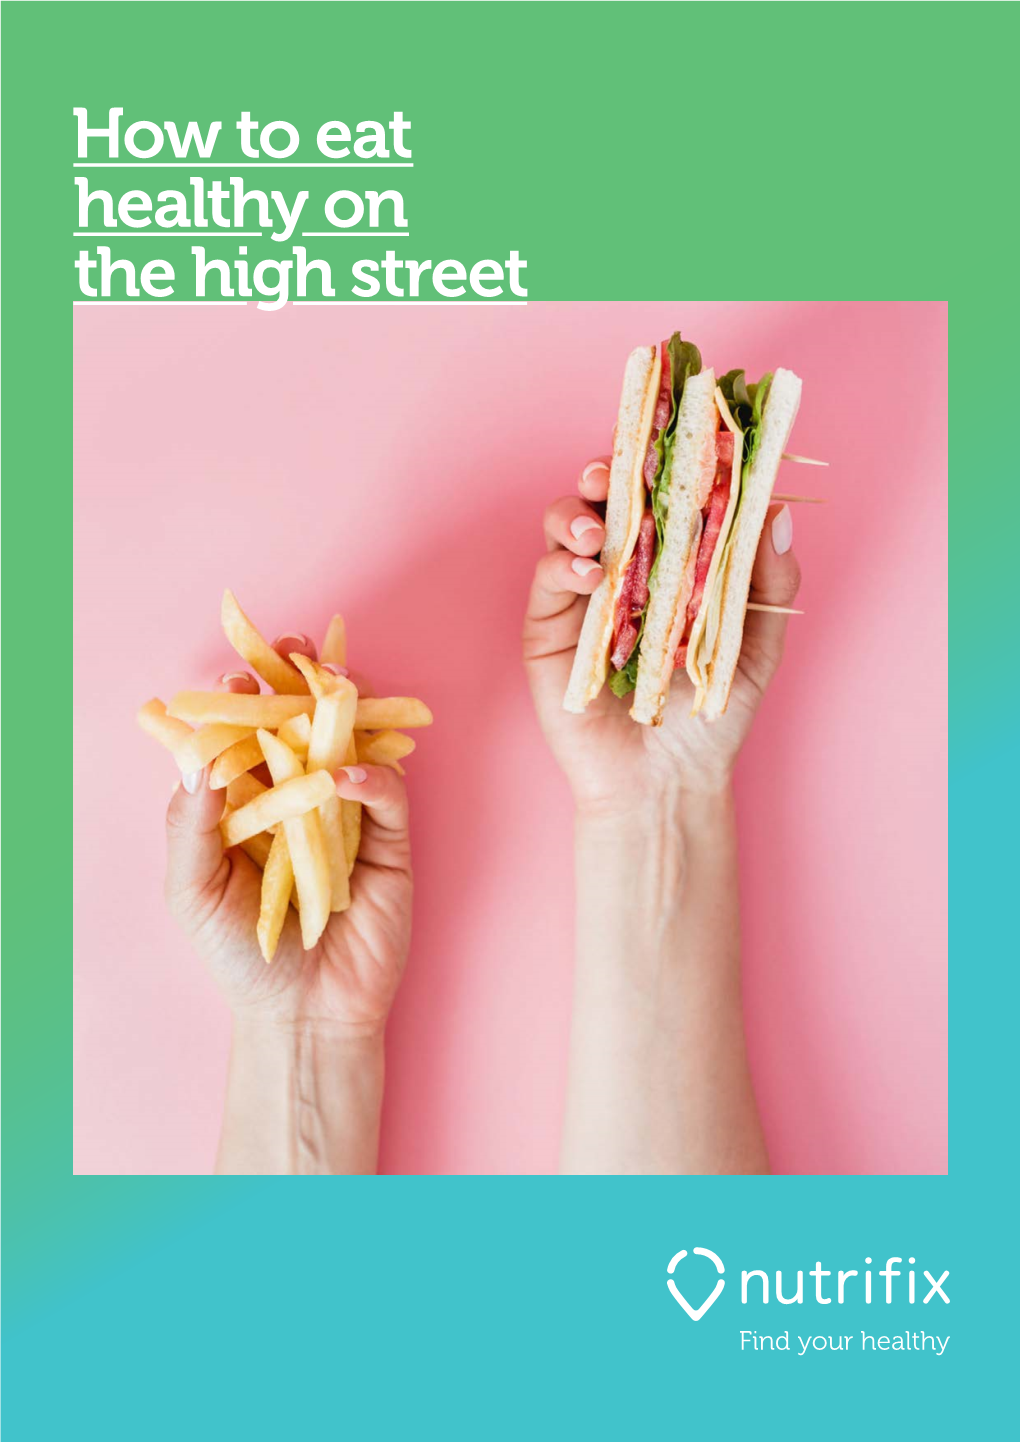 How to Eat Healthy on the High Street “What Do You Want for Lunch?”